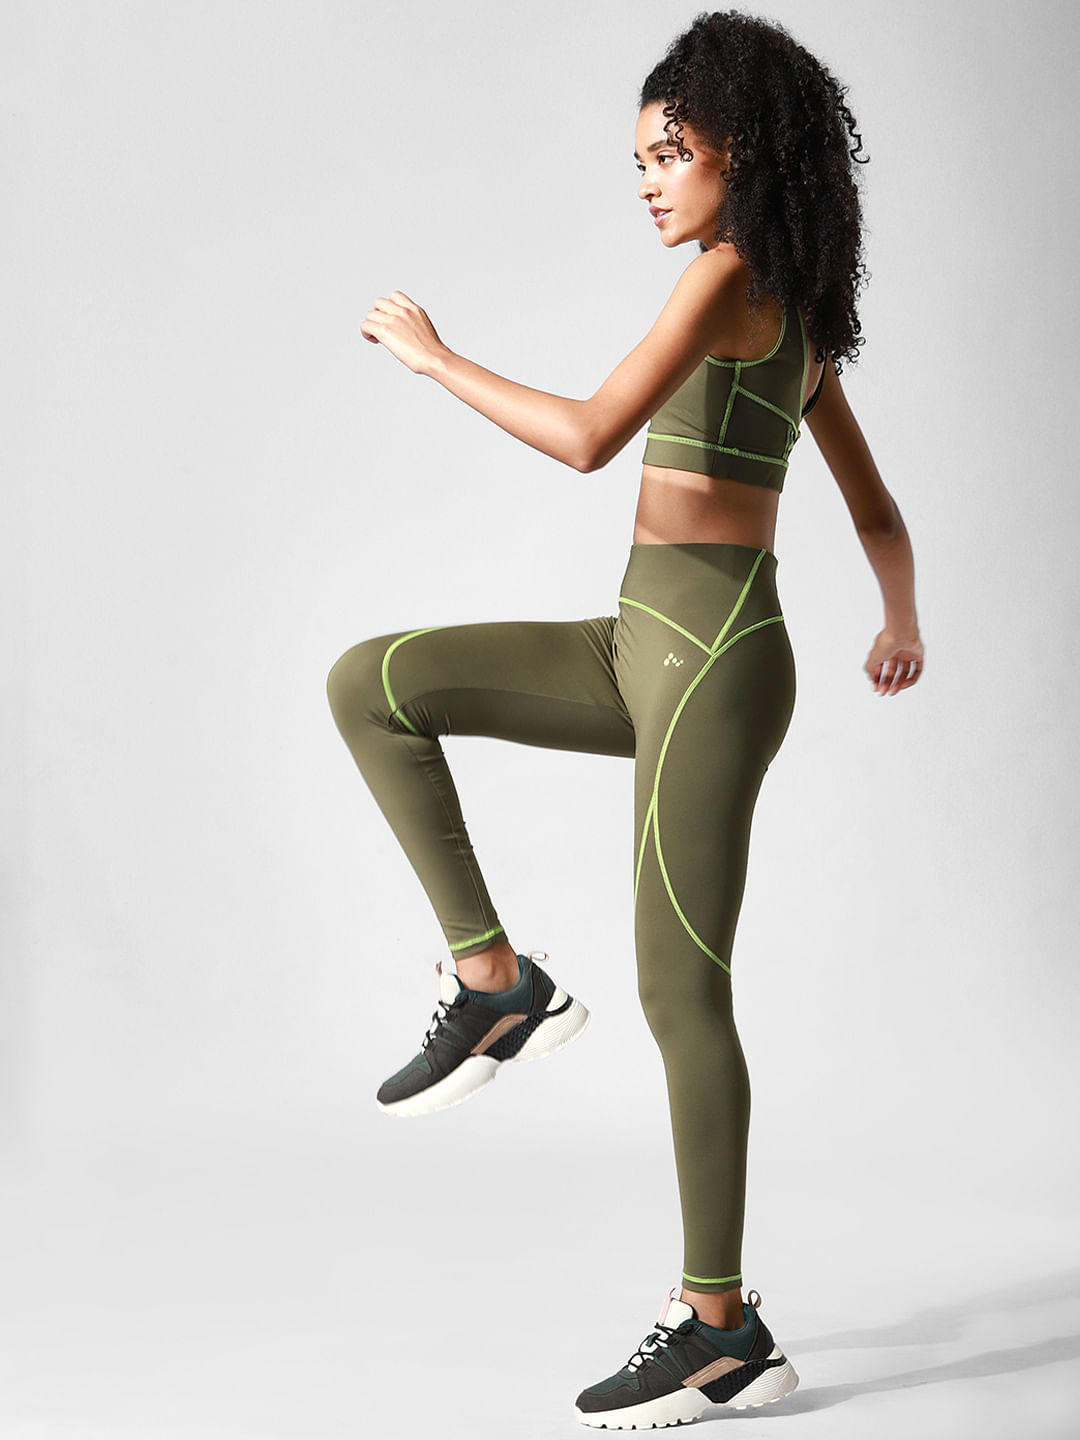 Fit 4 Change: athletic and casual leggings that inspire change